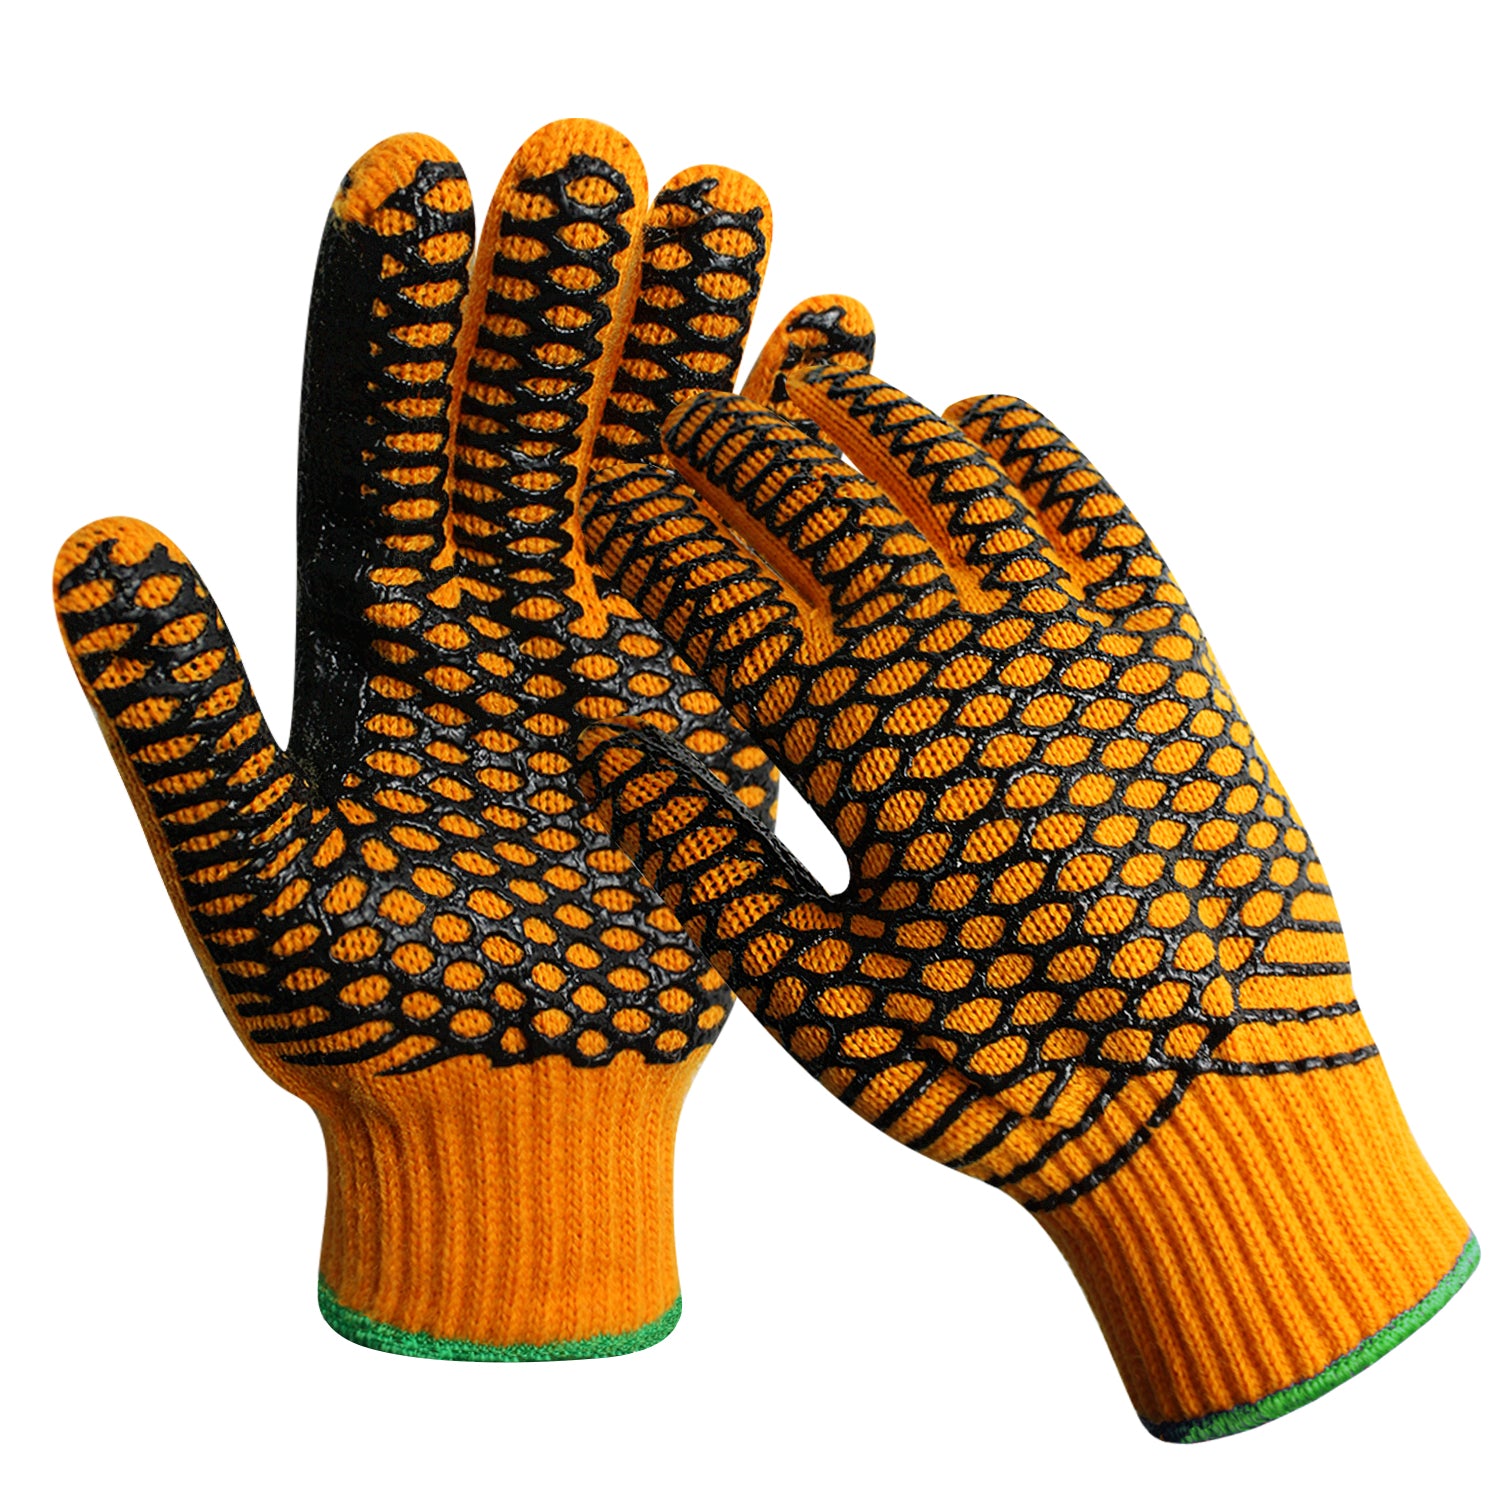 Evridwear Cotton Polyester String Knit Shell Safety Protection Work Gloves for Painter Mechanic Industrial Warehouse Gardening Construction Men One